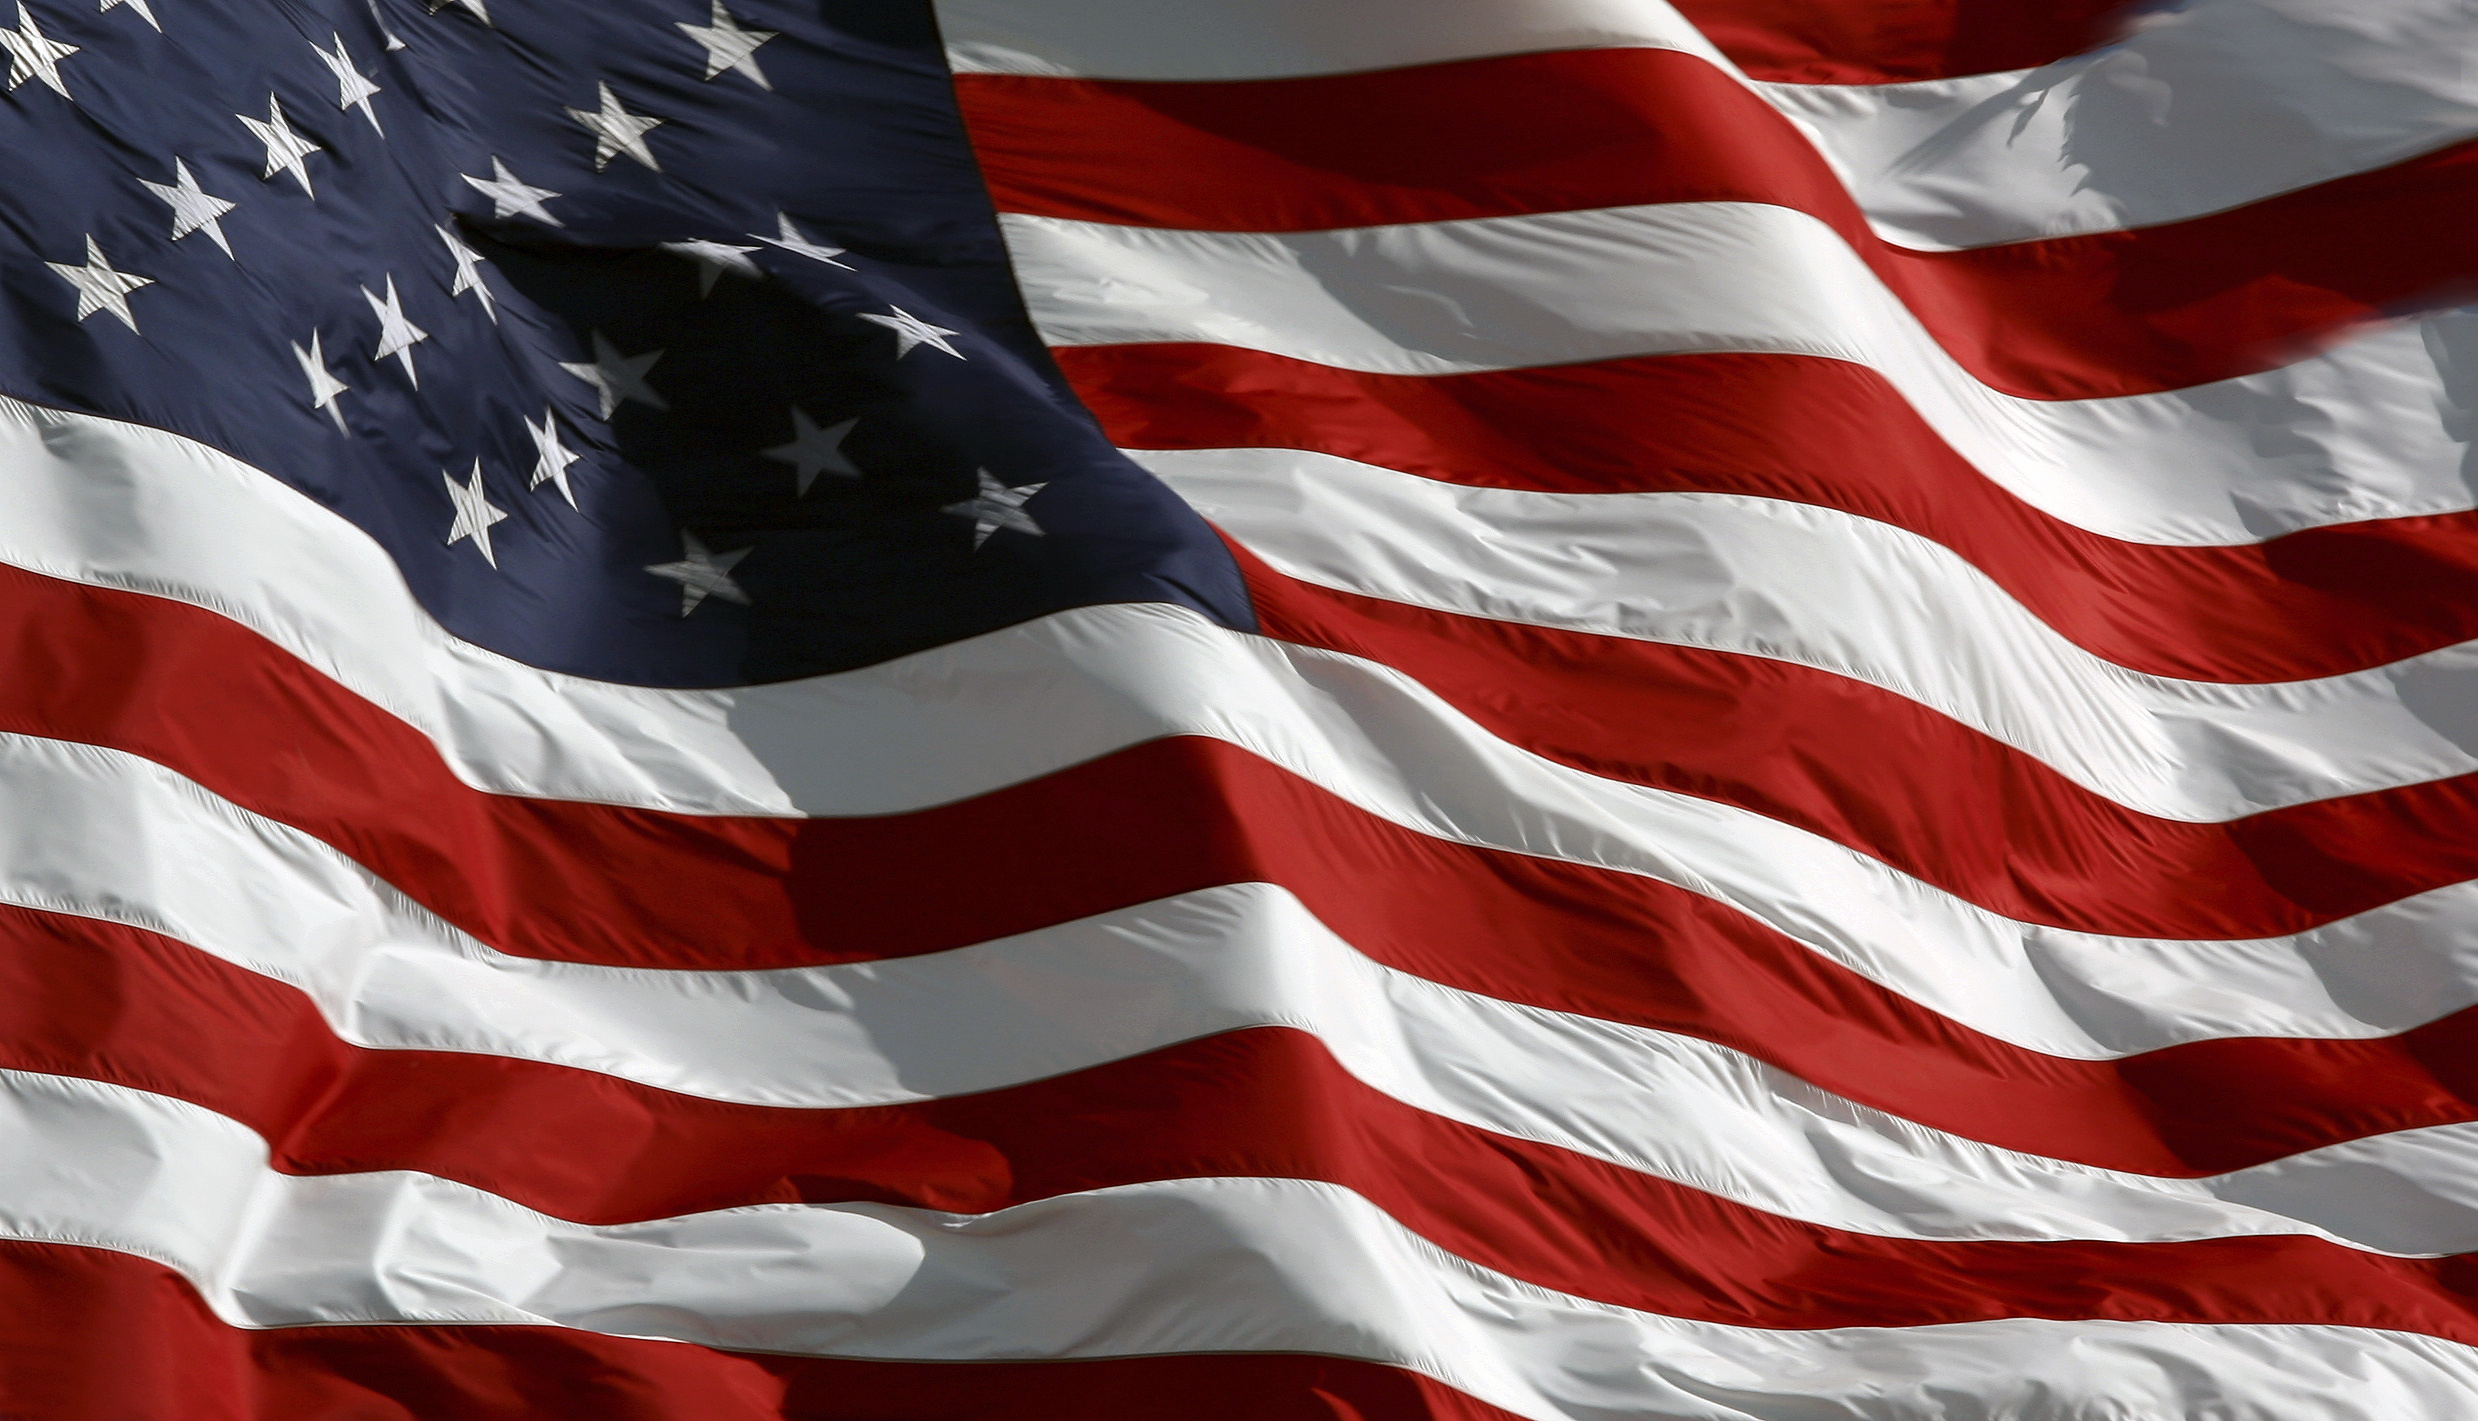 Flag: "Old Glory", The 50 stars on the flag represent the 50 U.S. states. 2480x1430 HD Background.